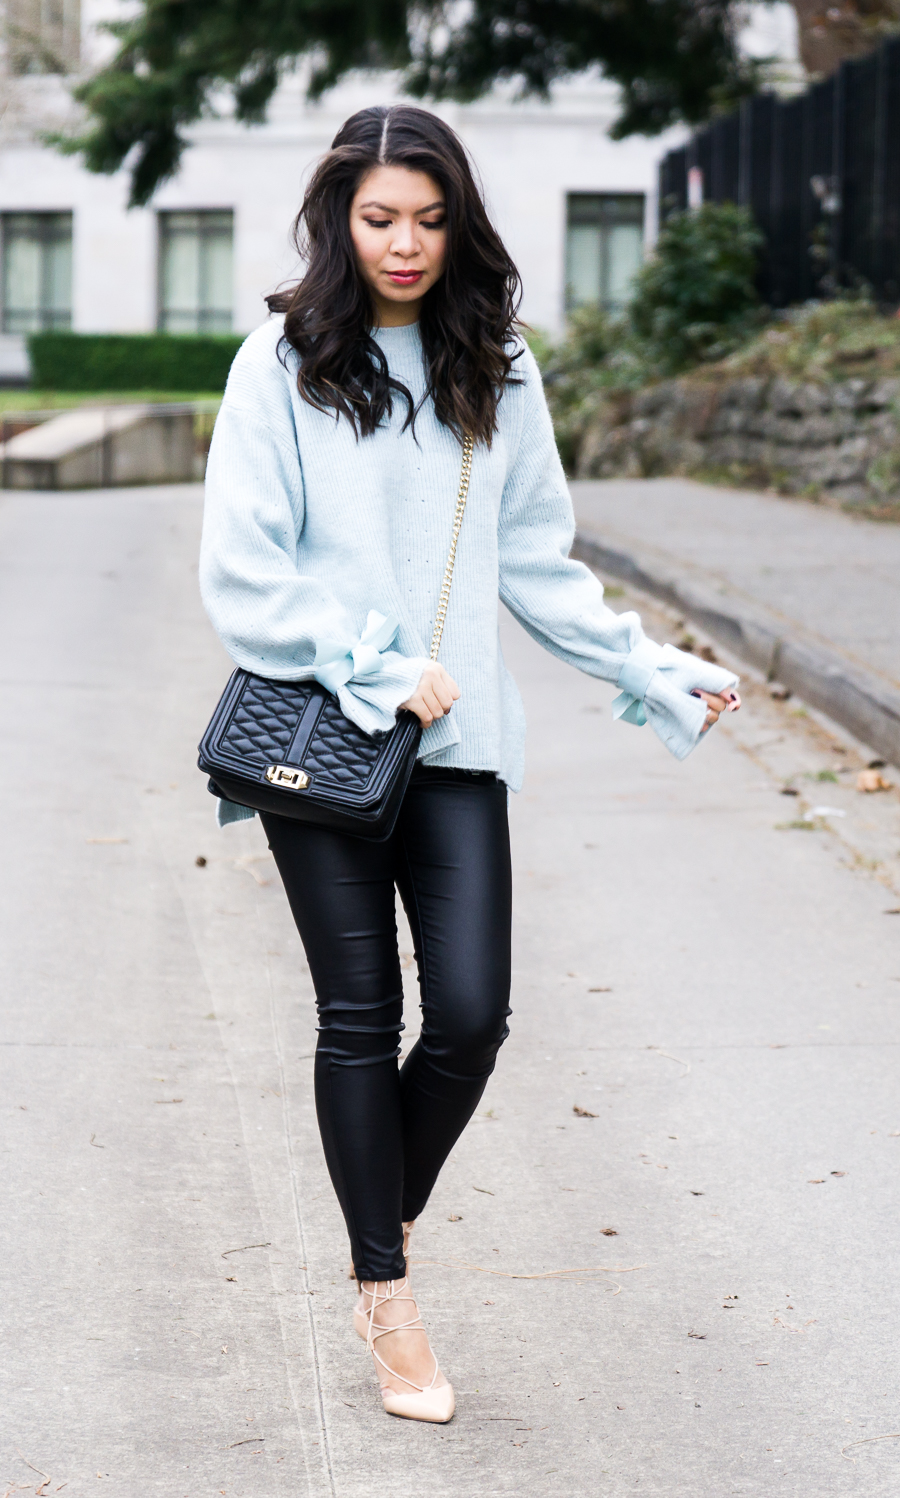 Topshop sweater with bows ribbon tie cuff, Asos coated skinny jeans, Rebecca Minkoff quilted crossbody, lace up heels, Valentines Day outfit idea